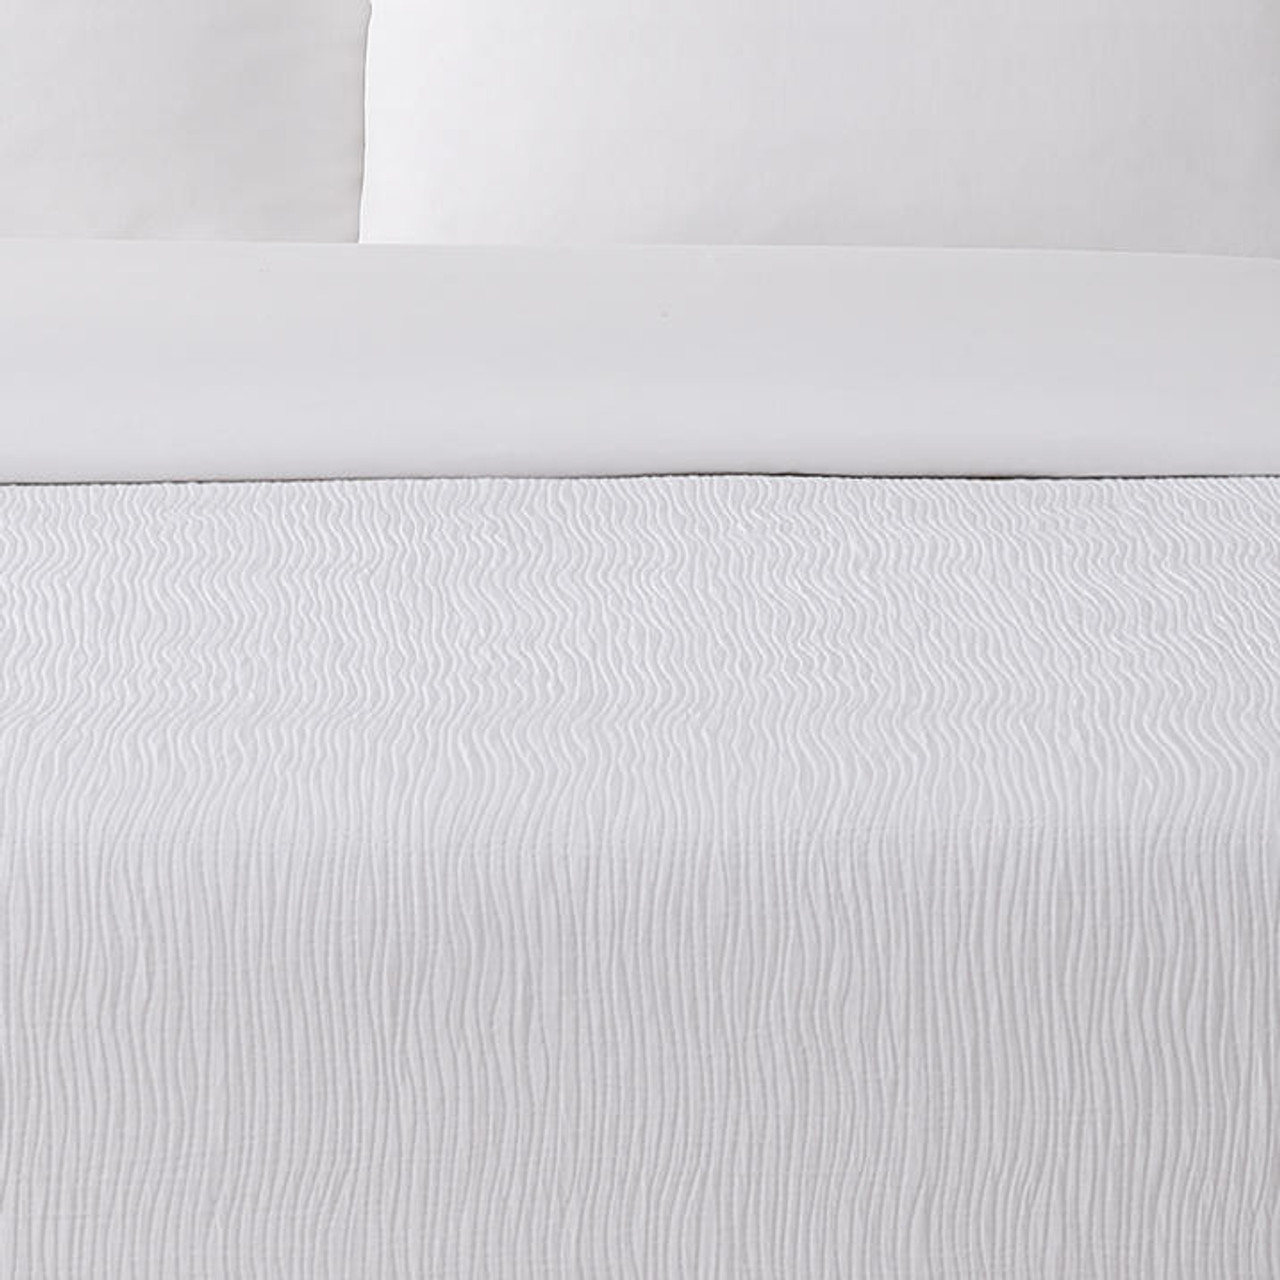 Berkshire Bedding Puff Jacquard Ripple Weave or 100 polyester decorative top sheet